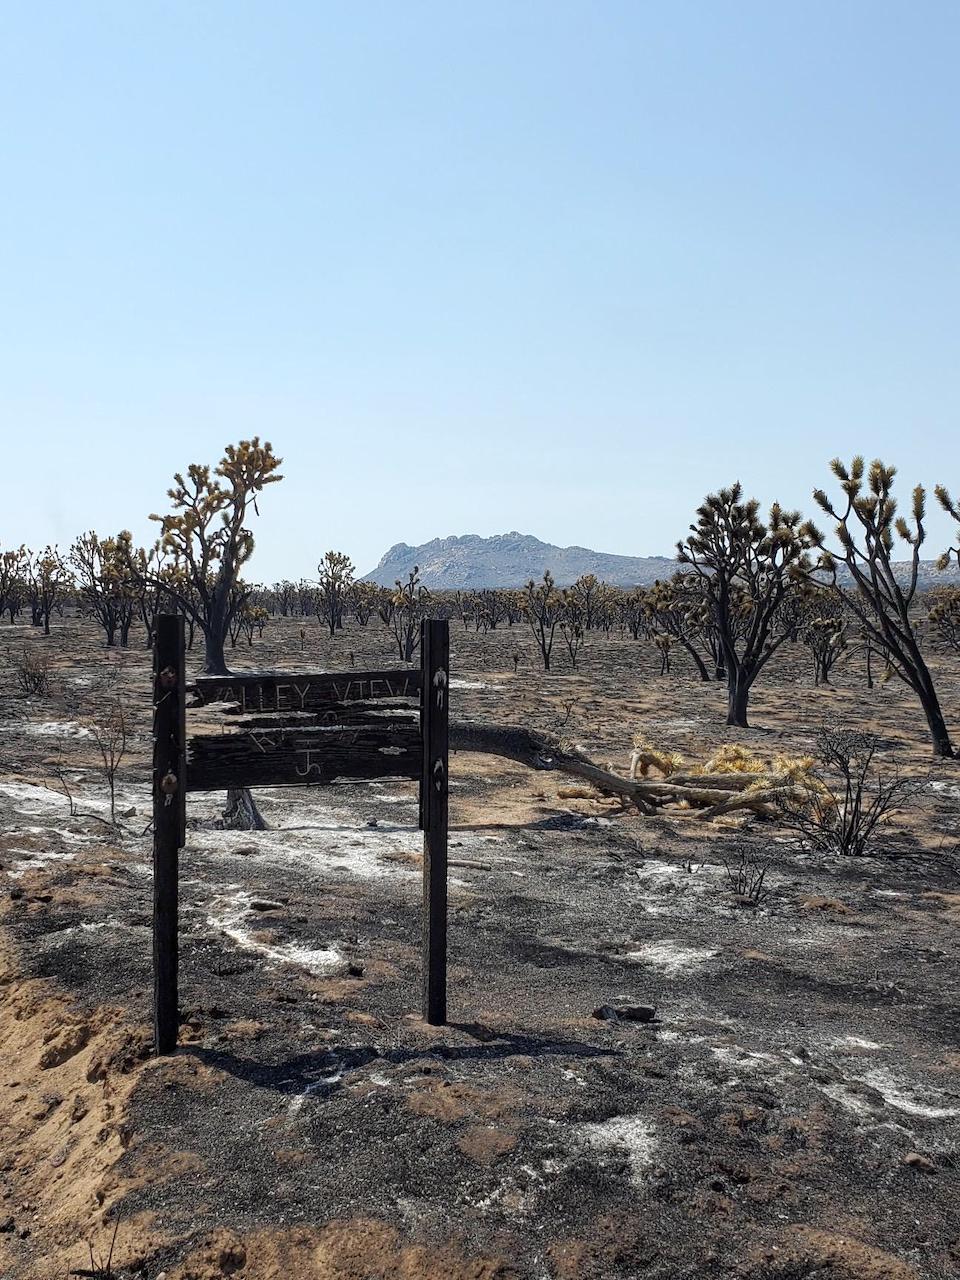 The Dome Fire did substantial damage to the Joshua tree forest in Mojave National Preserve/NPS